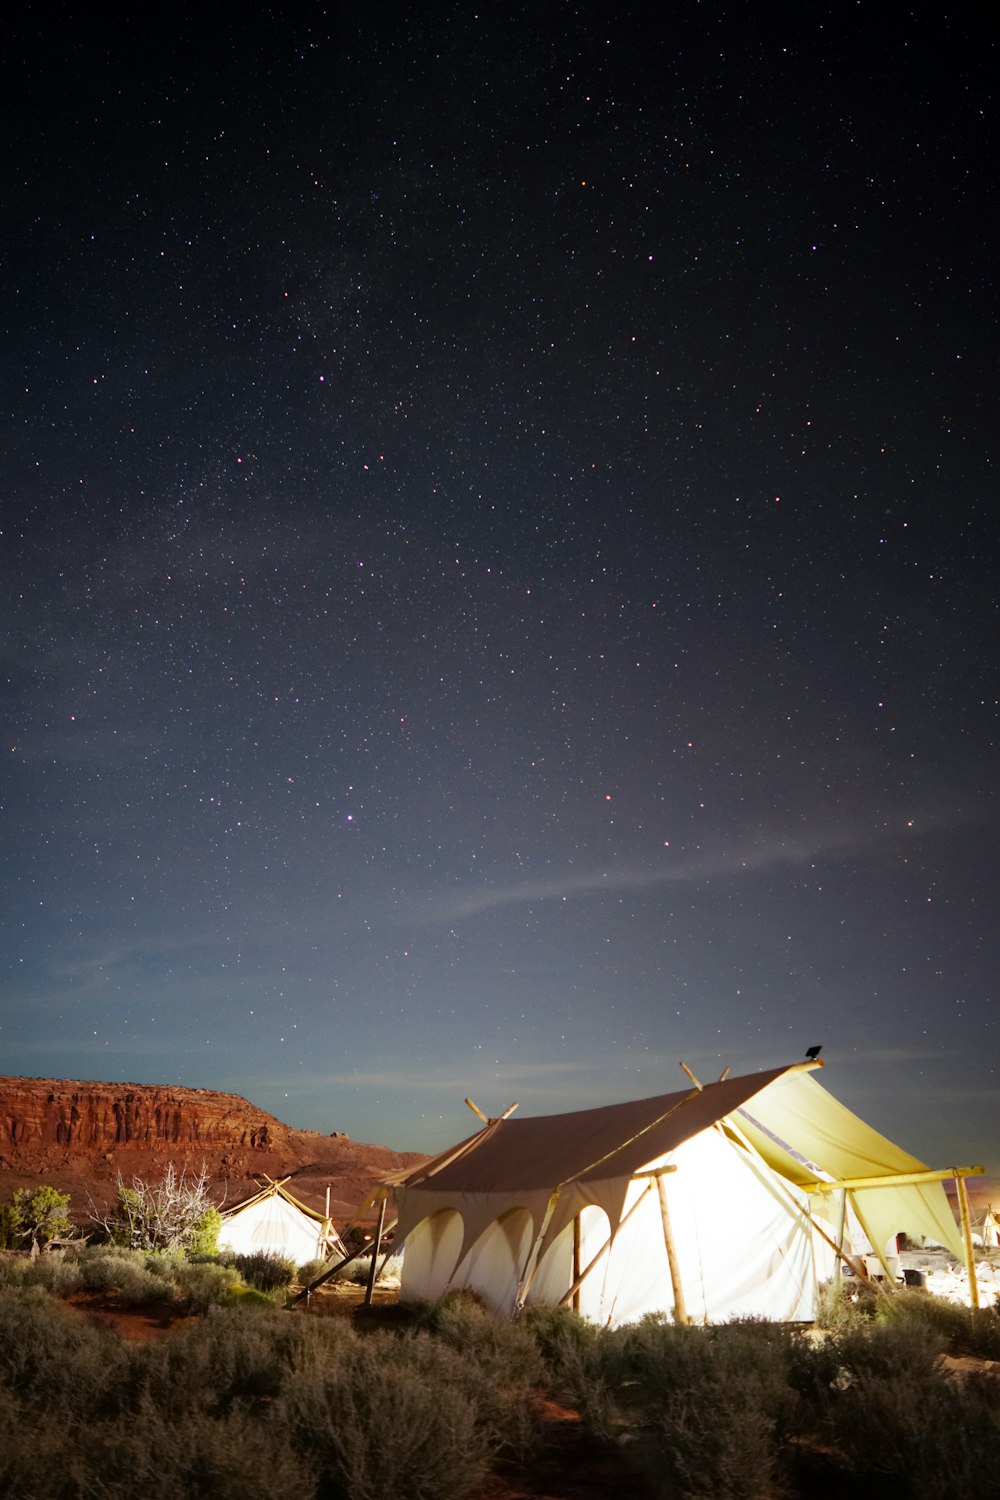 white cabin tent on open field during nighttime